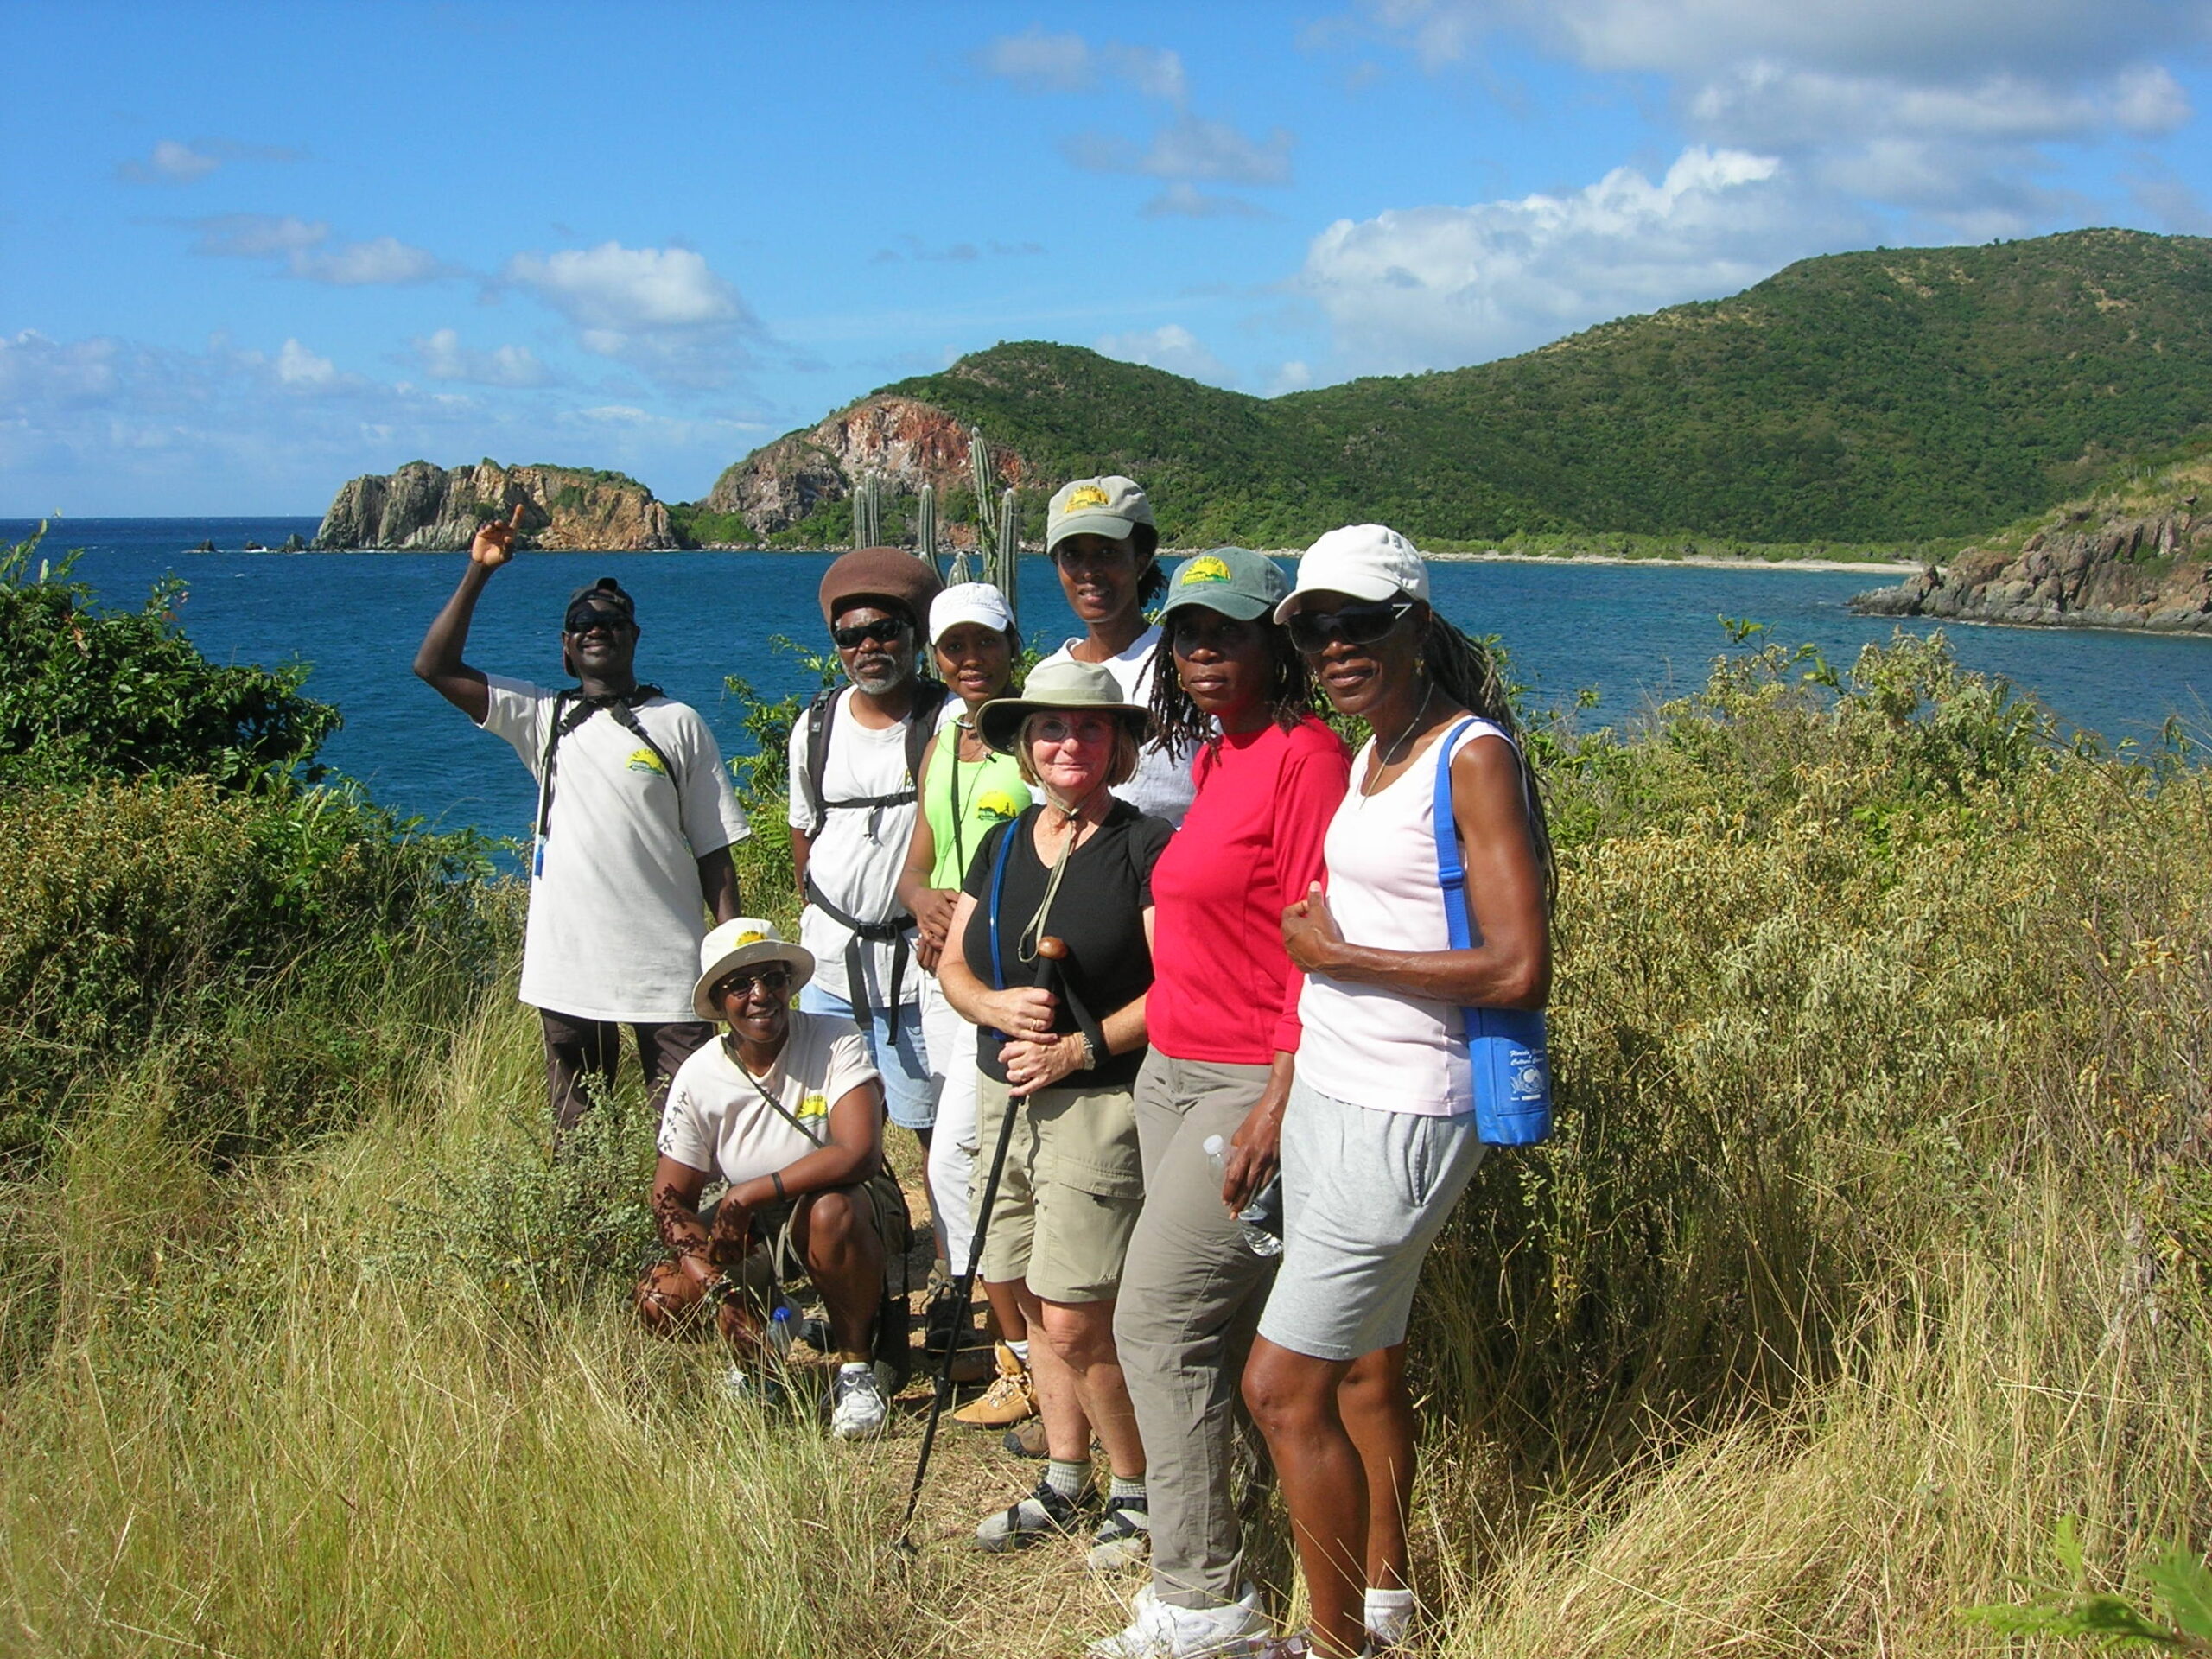 Lameshur Estate & Bay, Members of the St. Croix Hiking Association exploring the Virgin Islands National Park in 2015. (Photo courtesy Olasee Davis)